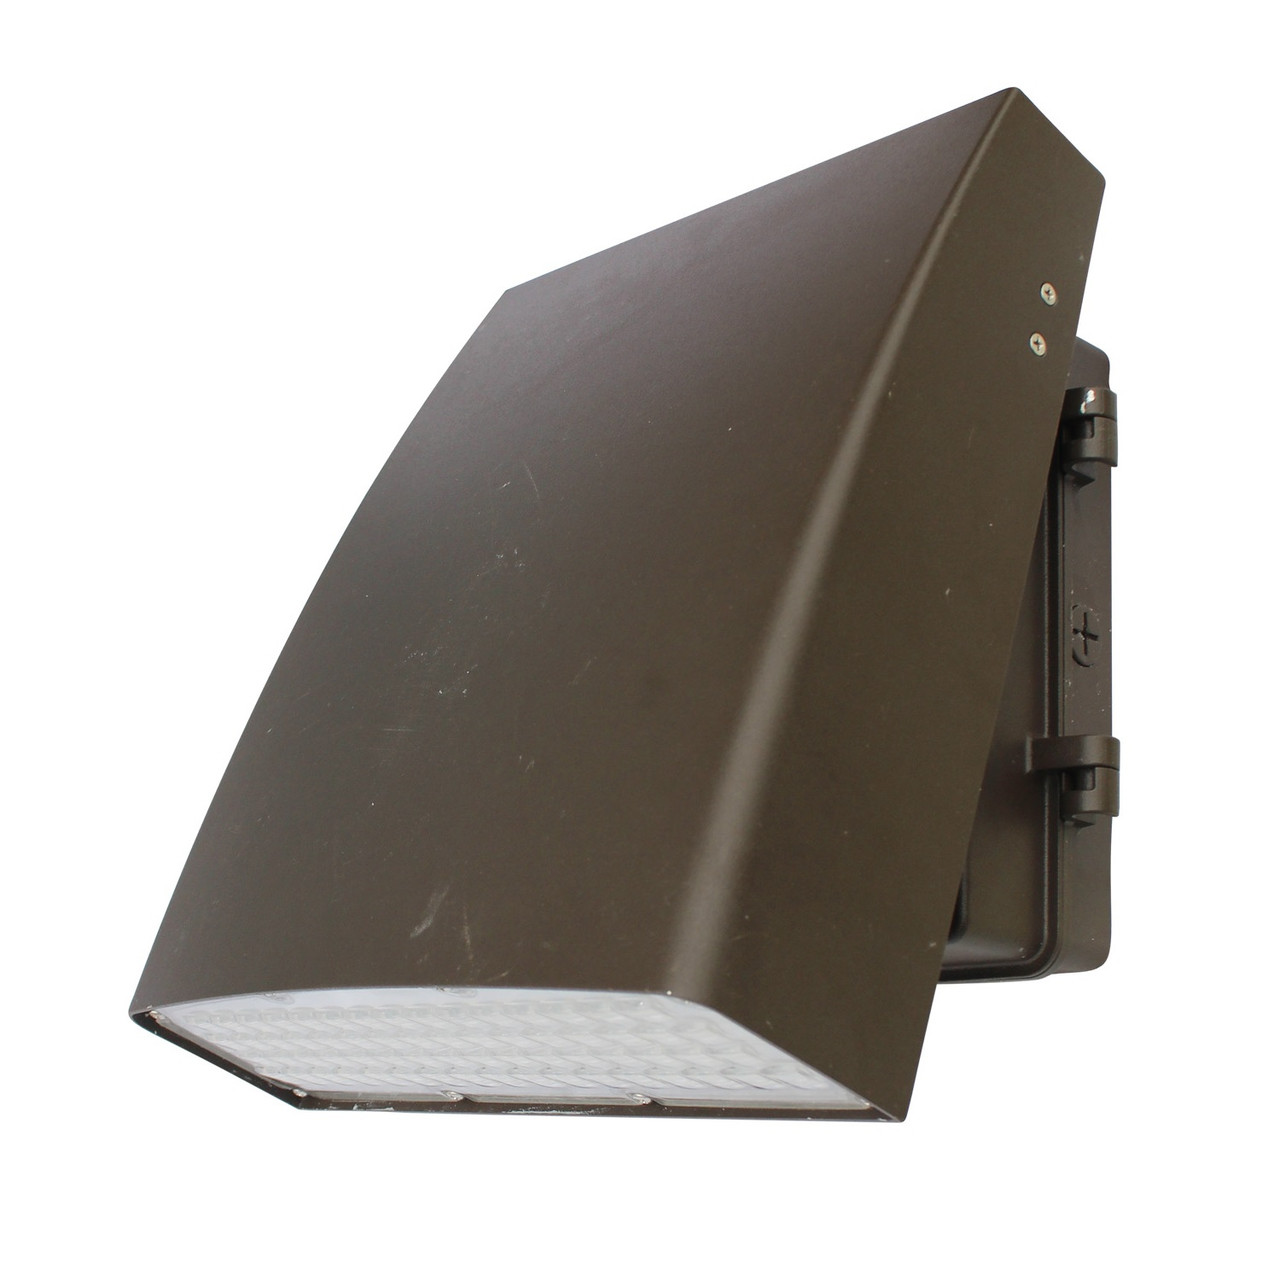 LED FULL-CUTOFF WALL PACK 30-50 WATTS 3000K 4000K & 5000K - The LEDWPCA series is a contemporary, commercial-grade area luminaire. It features a heavy-duty, spring-loaded hinge, which provides the flexibility of focusing light near the mounting surface or projecting light forward. With a die cast aluminum housing and a polycarbonate lens, the LEDWPCA series will stand up to many years of punishing environmental conditions. High-efficacy, long-life LEDs provide both energy and maintenance cost savings compared to traditional, HID area lights.

▪ Available in 3000k (warm white), 4000k (neutral white) and 5000k (cool white) color temperatures.*
▪ Long-life LEDs provide 69,000 hours of operation with at least 70% of initial lumen output (L70).**
▪ LEDWPCA30W delivers 3,181 lumens and 114 lumens per watt (LPW) at both 3000k & 4000k, and 3,298 lumens and 120 LPW at 5000k.*
▪ LEDWPCA50W delivers 5,099 lumens and 103 lumens per watt (LPW) at both 3000k & 4000k, and 5,287 lumens and 108 LPW at 5000k.*
▪ Heavy-duty, spring-loaded hinge provides the flexibility of focusing light near the mounting surface or projecting light forward.
▪ Universal 100-277 AC voltage (50-60Hz) is standard.
▪ Watertight, compression-type electrical connectors prevent moisture intrusion.
▪ Power factor > 0.90.
▪ Total harmonic distortion < 20%.
▪ Color rendering index > 80.
▪ Die cast aluminum housing with durable, dark bronze, powder coat paint.
▪ Durable, UV-resistant polycarbonate lens.
▪ Removable, threaded plugs for side attachment of ½” rigid electrical conduit, or for button photocells.
▪ Easy installation in new construction or retrofit.